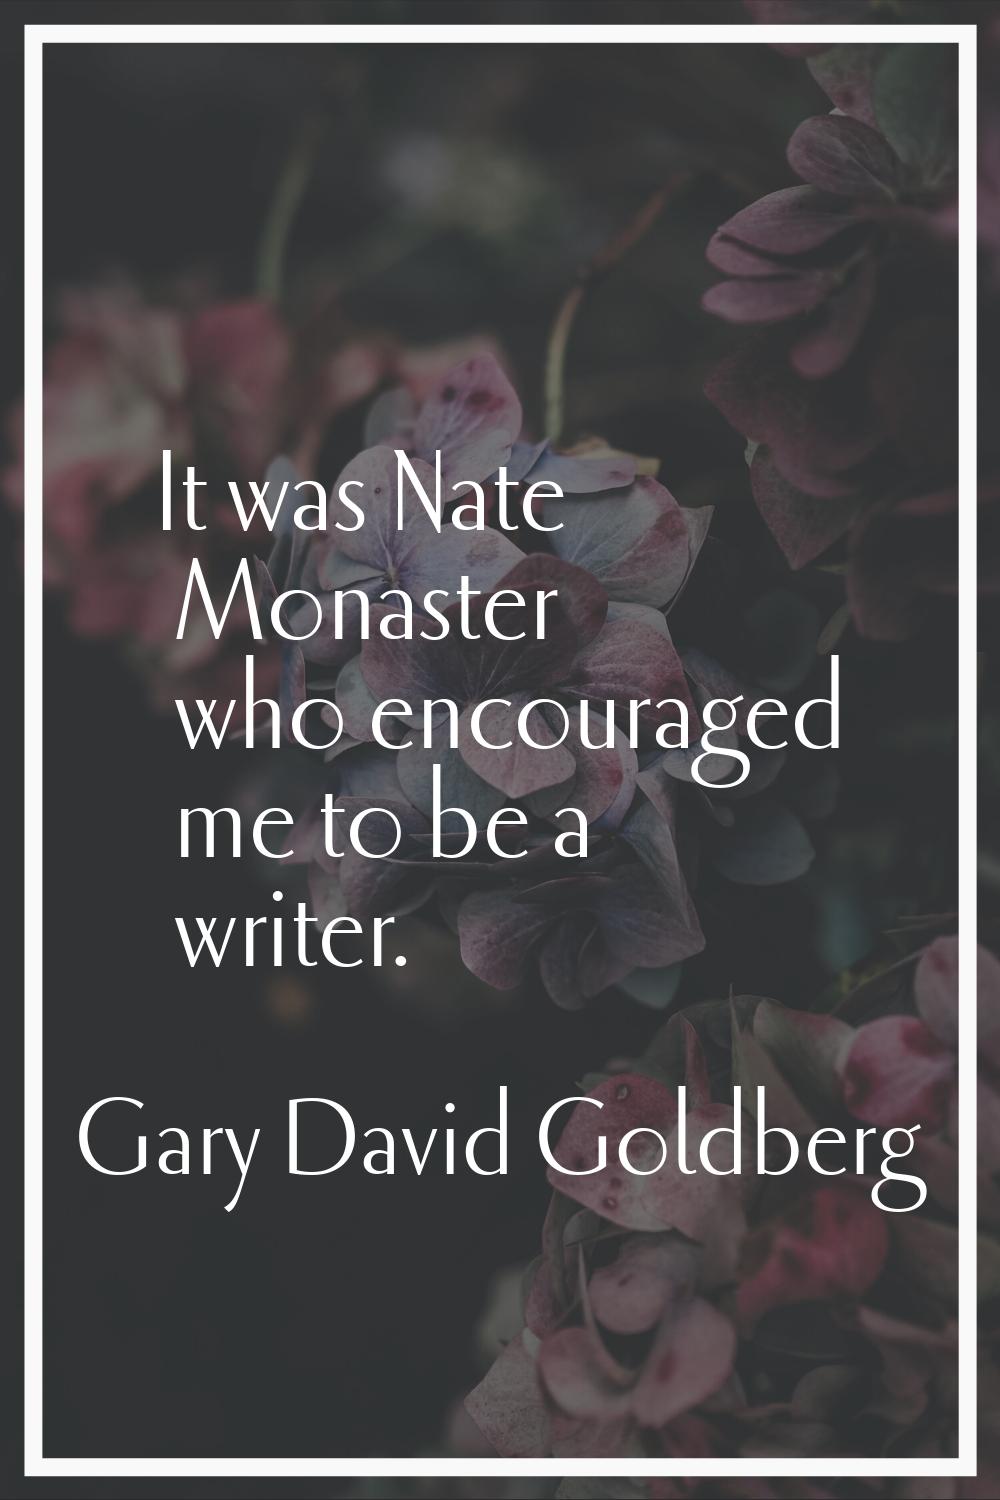 It was Nate Monaster who encouraged me to be a writer.